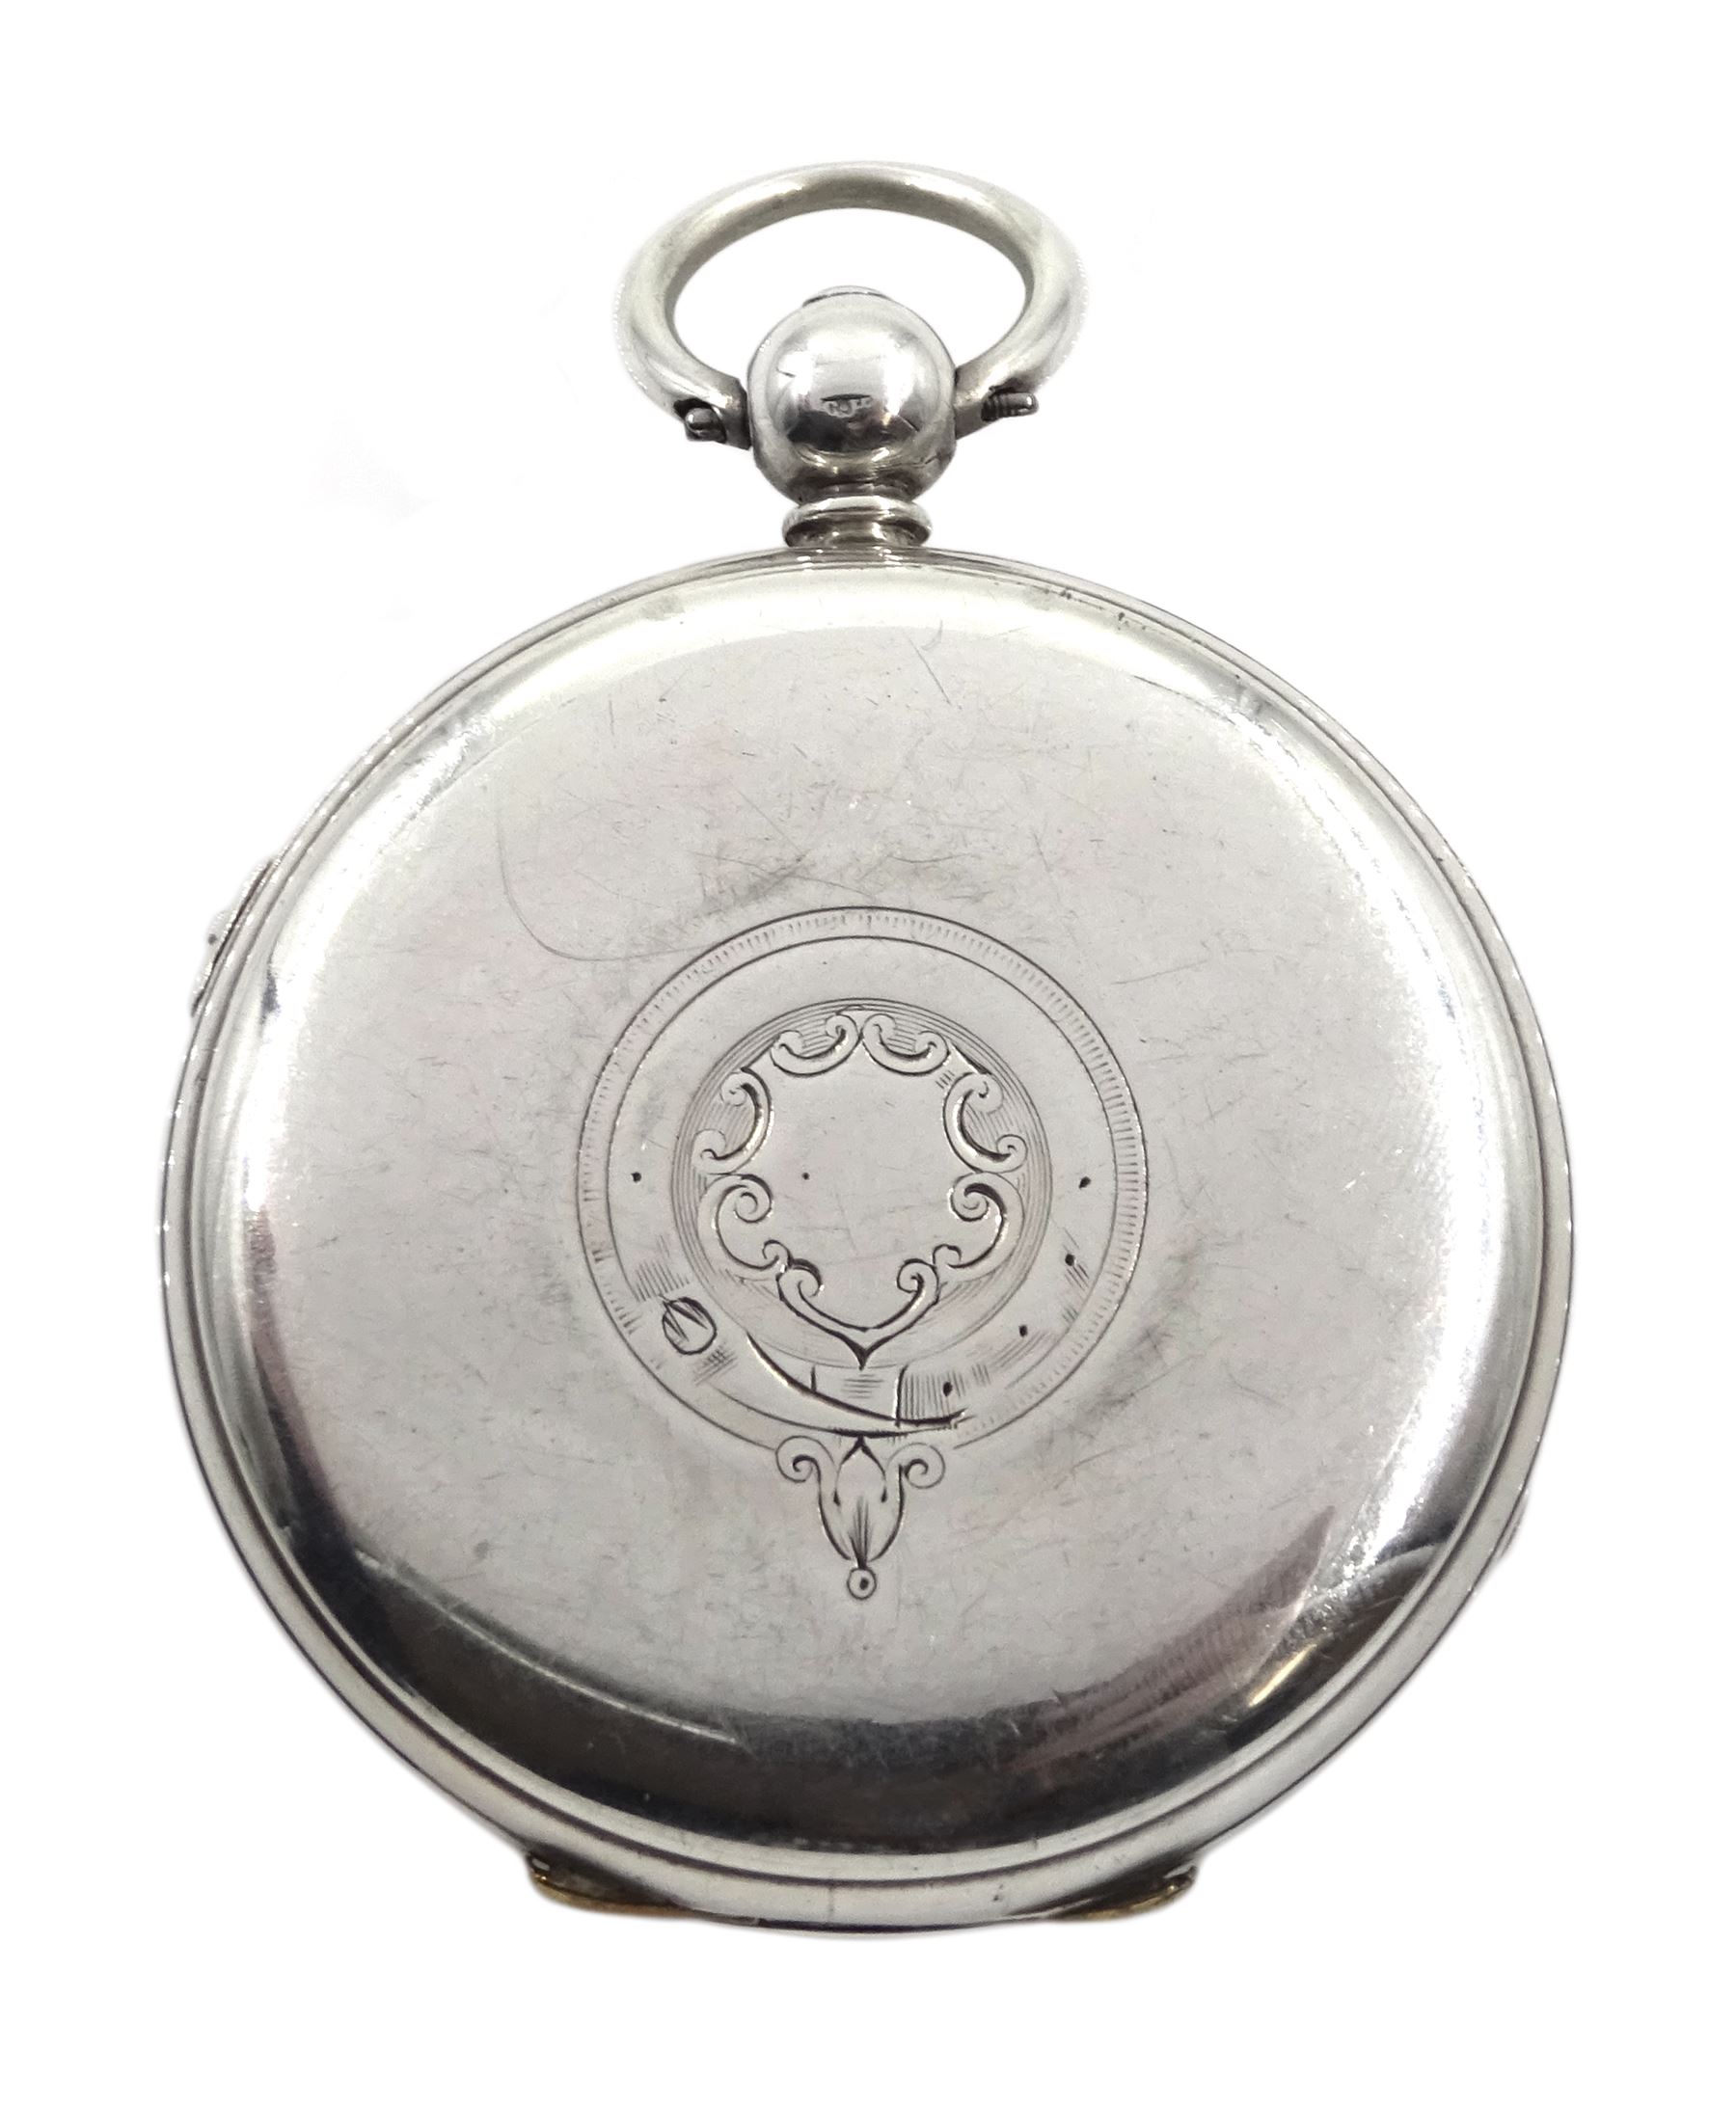 Victorian silver open face key wound English lever chronograph pocket watch No. 21227, cream enamel - Image 6 of 6